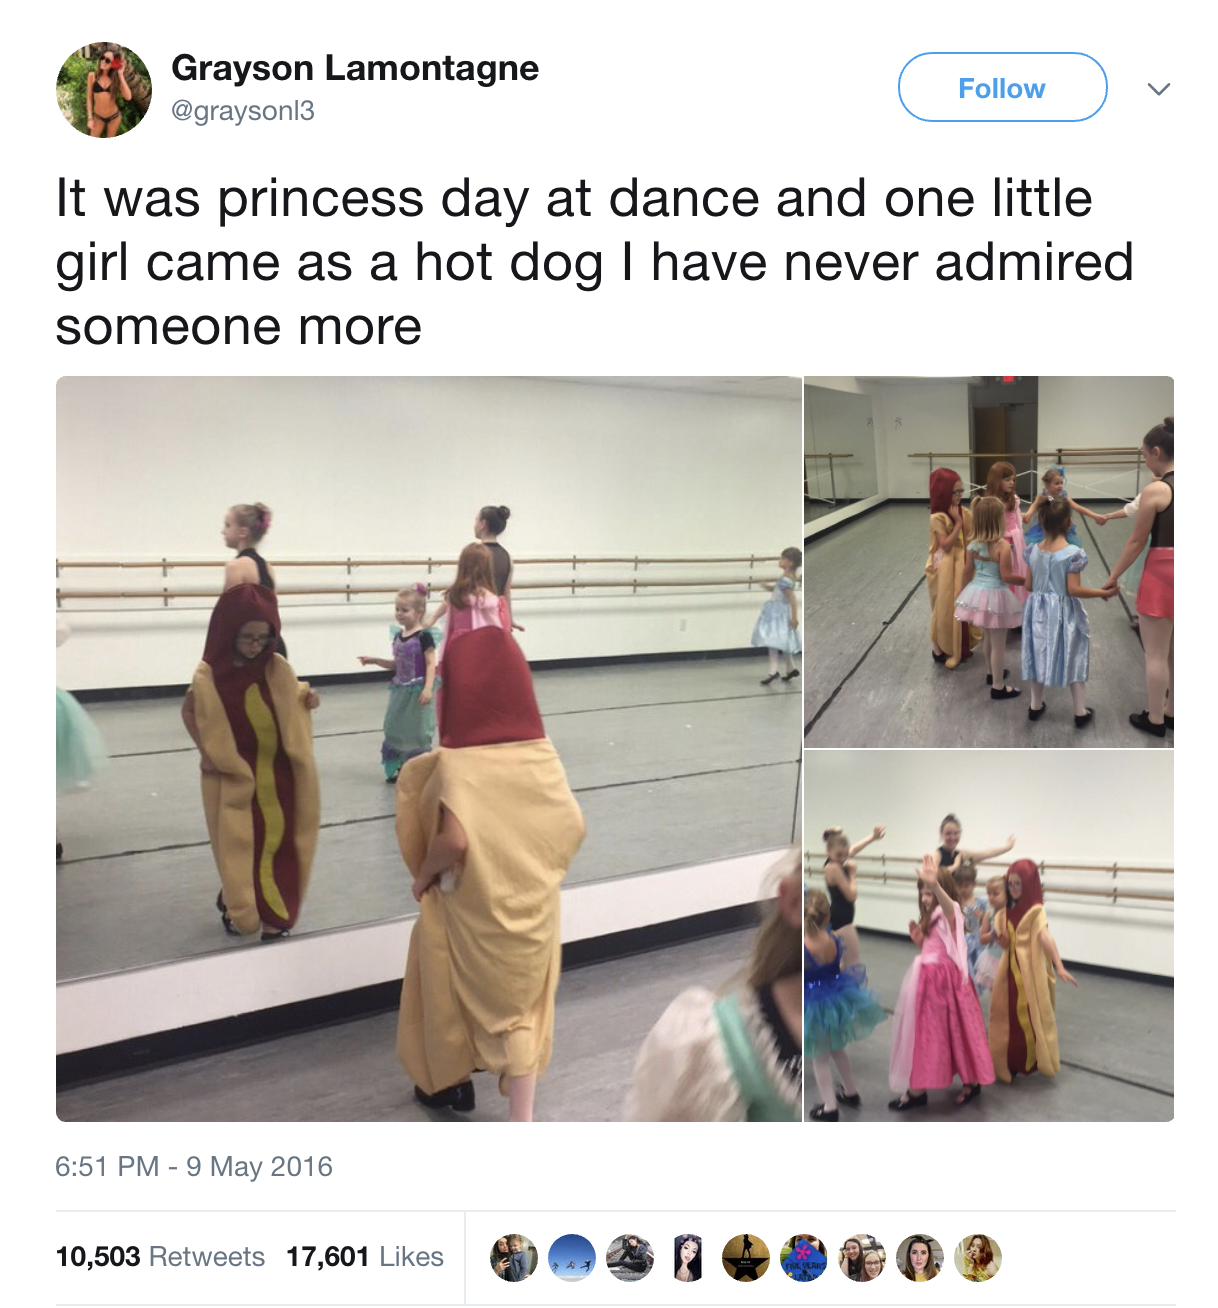 For Princess Day at a dance school, a little girl comes dressed as a hot dog